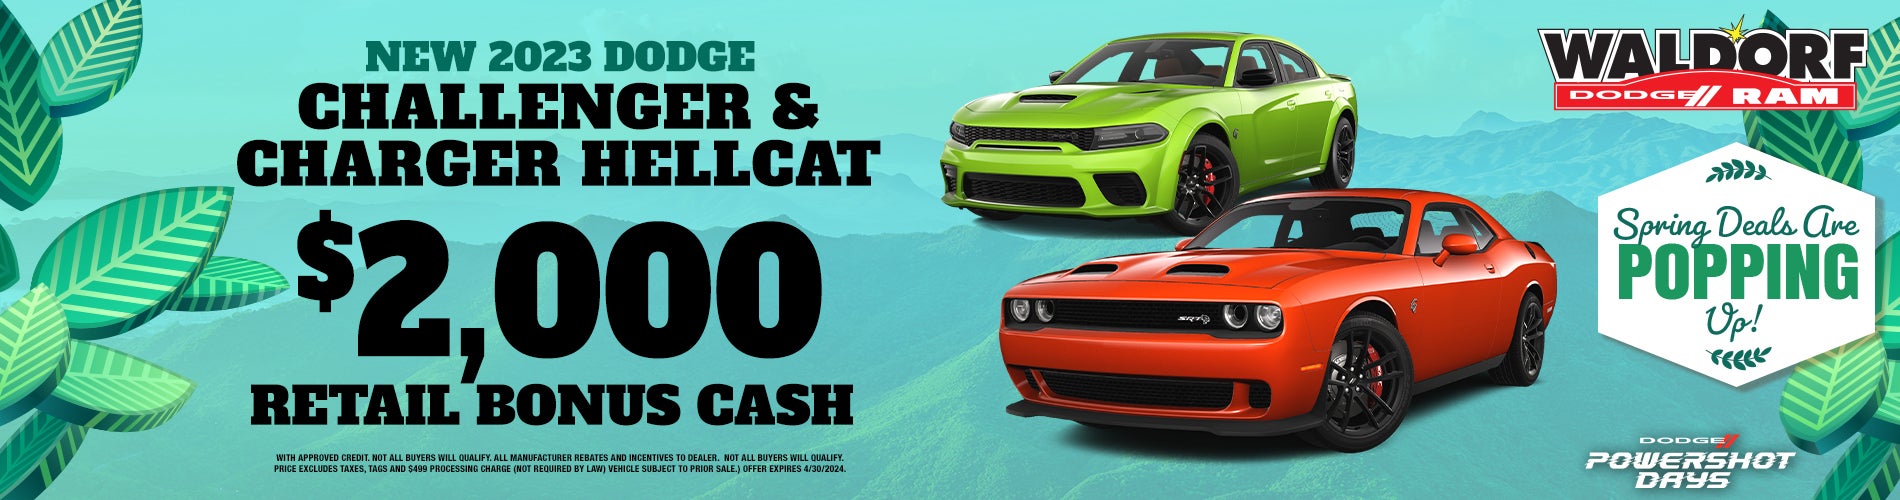 $2,000 Retail Bonus Cash on Challenger and Charger Hellcat!